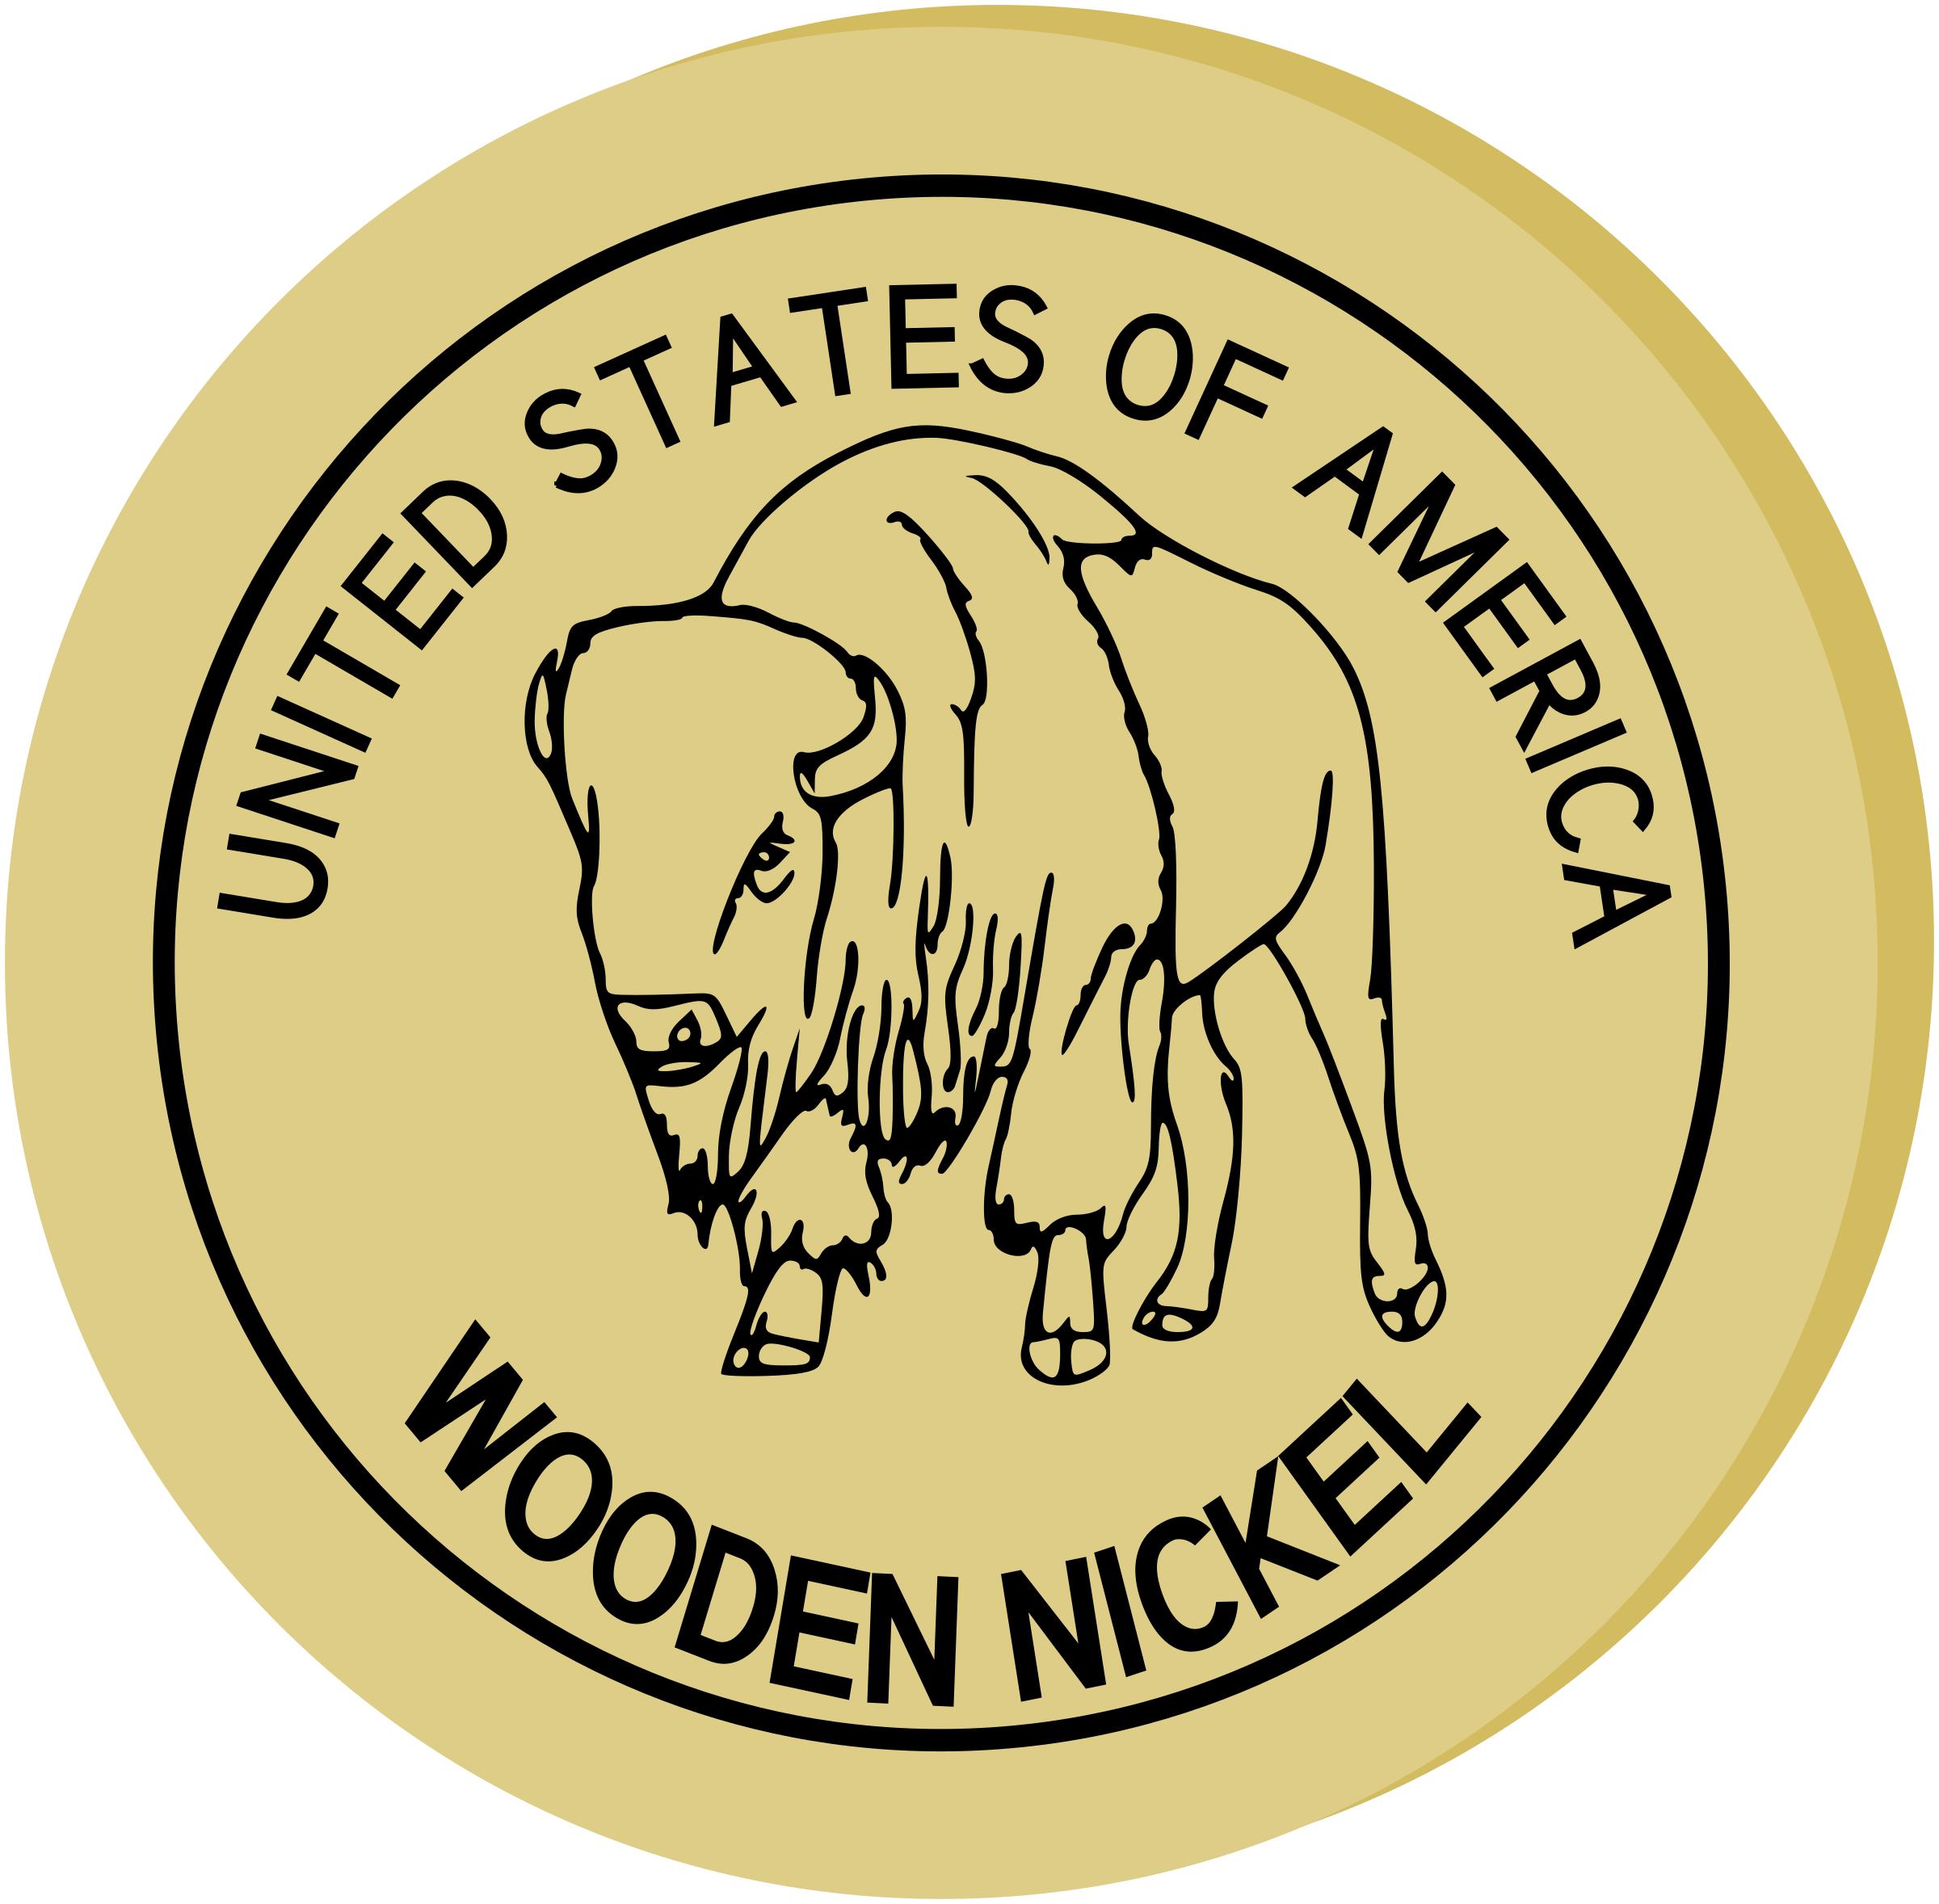 Wooden Nickel PNG icons